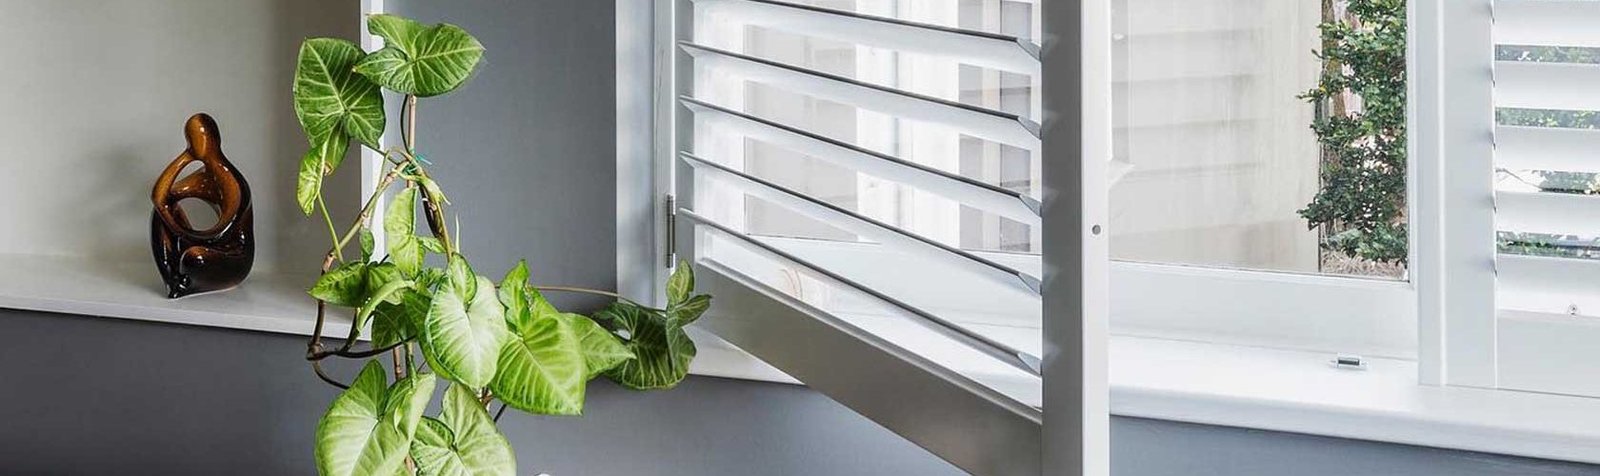 WINDOW BLINDS THAT GIVE A PERSONALISED EXPERIENCE